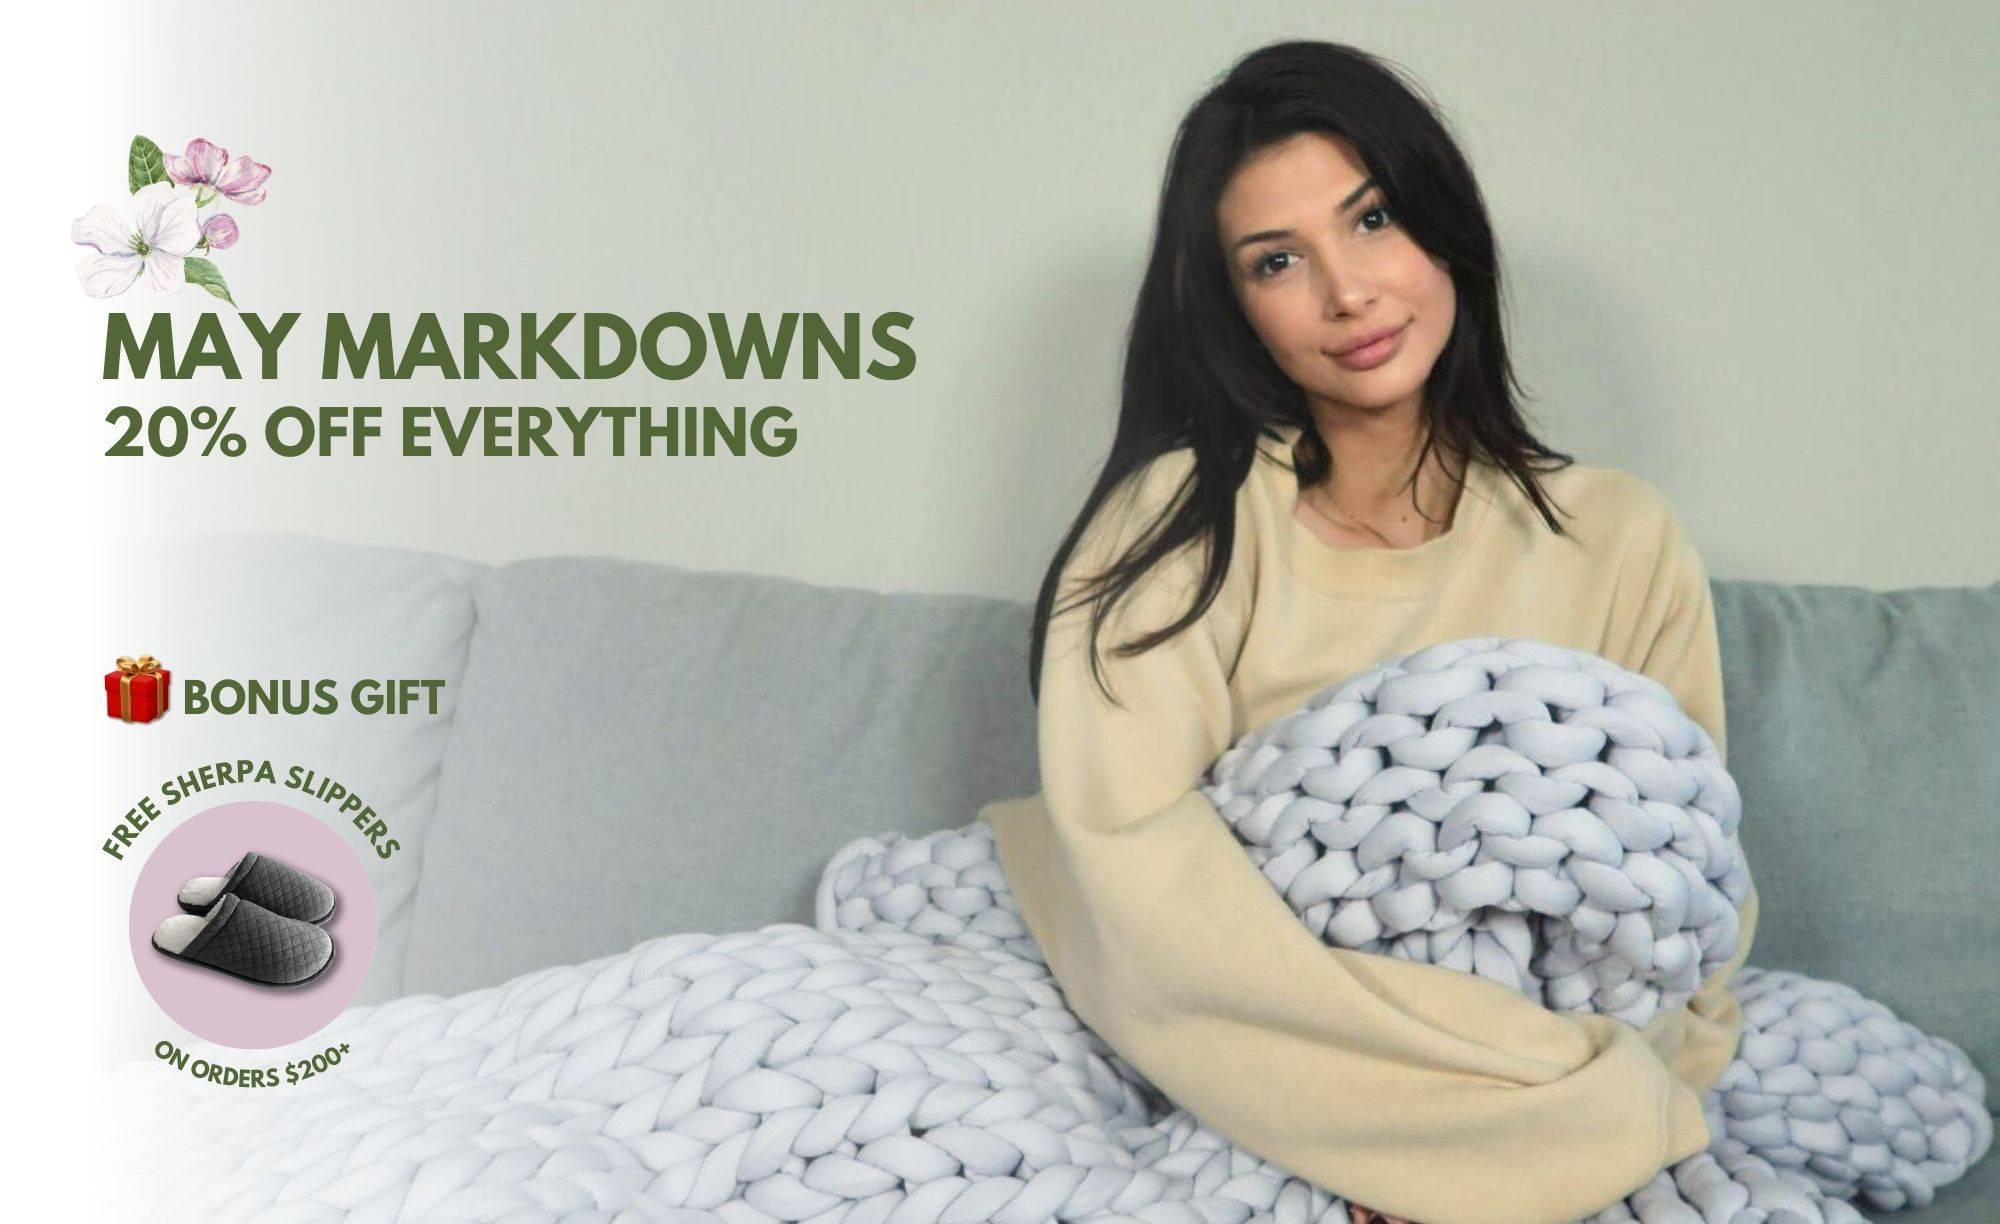 May Markdowns - 20% Off Everything & Free Slippers